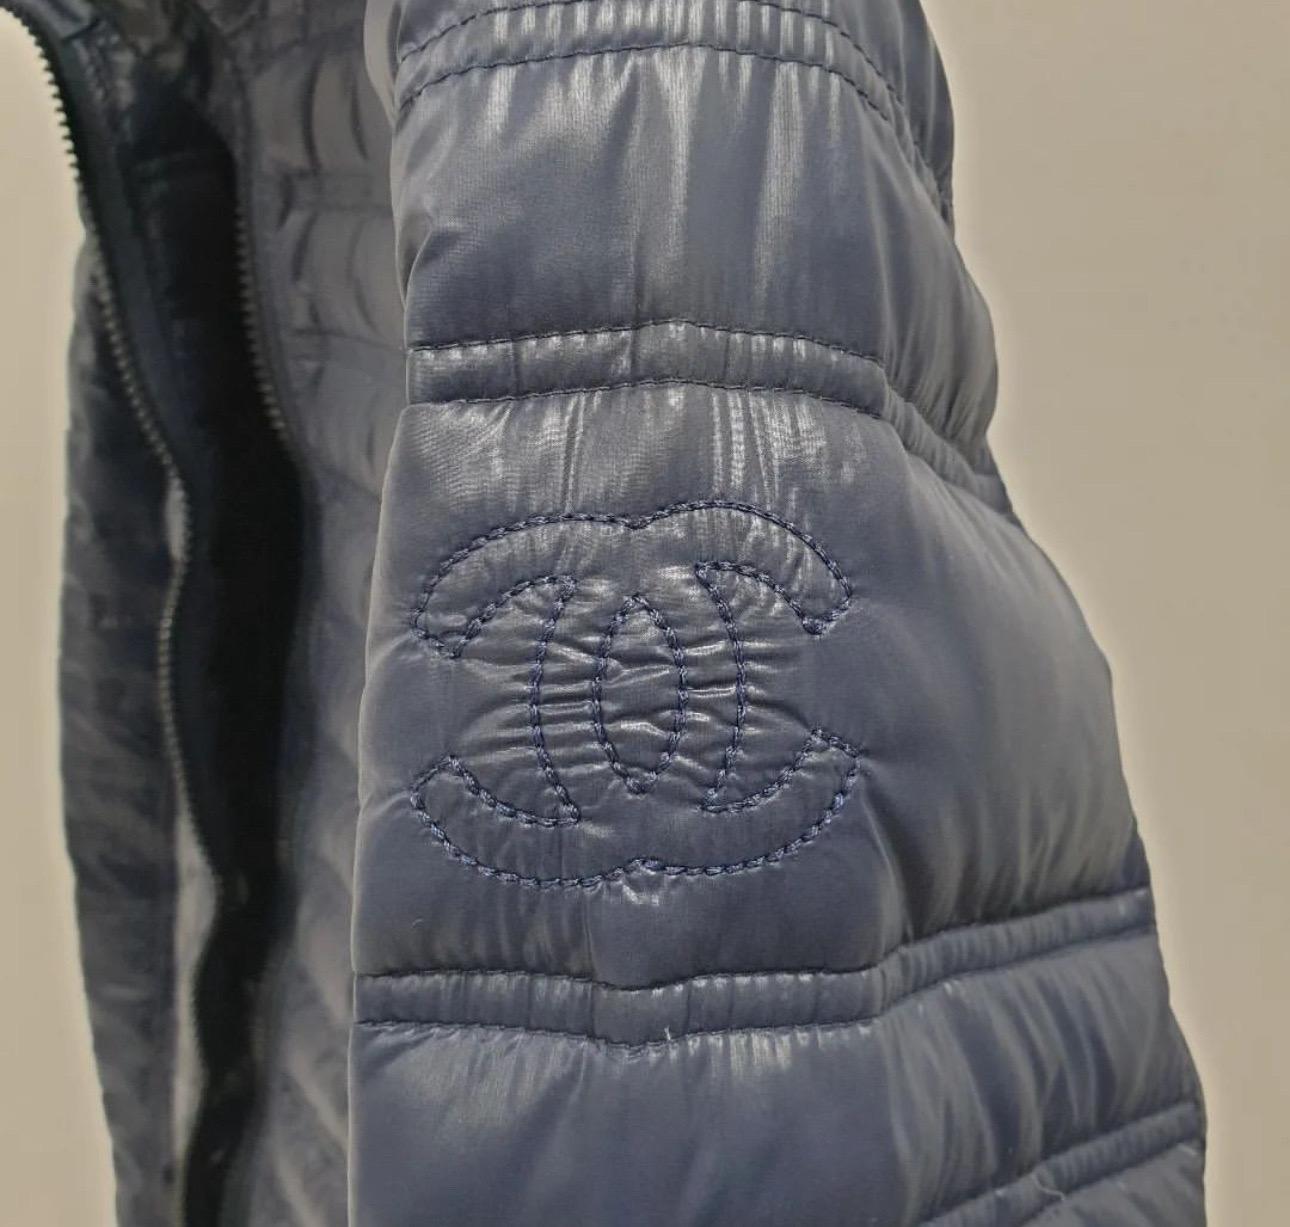 Chanel quilted 100% down puffer jacket from 2009 collection. 
This is rare to find. 
It is pre-owned in mint condition. Signs of wear seen on pics.
It is adorned with embroidered Chanel interlocking CC logo at left sleeve,  2 pockets at sides and